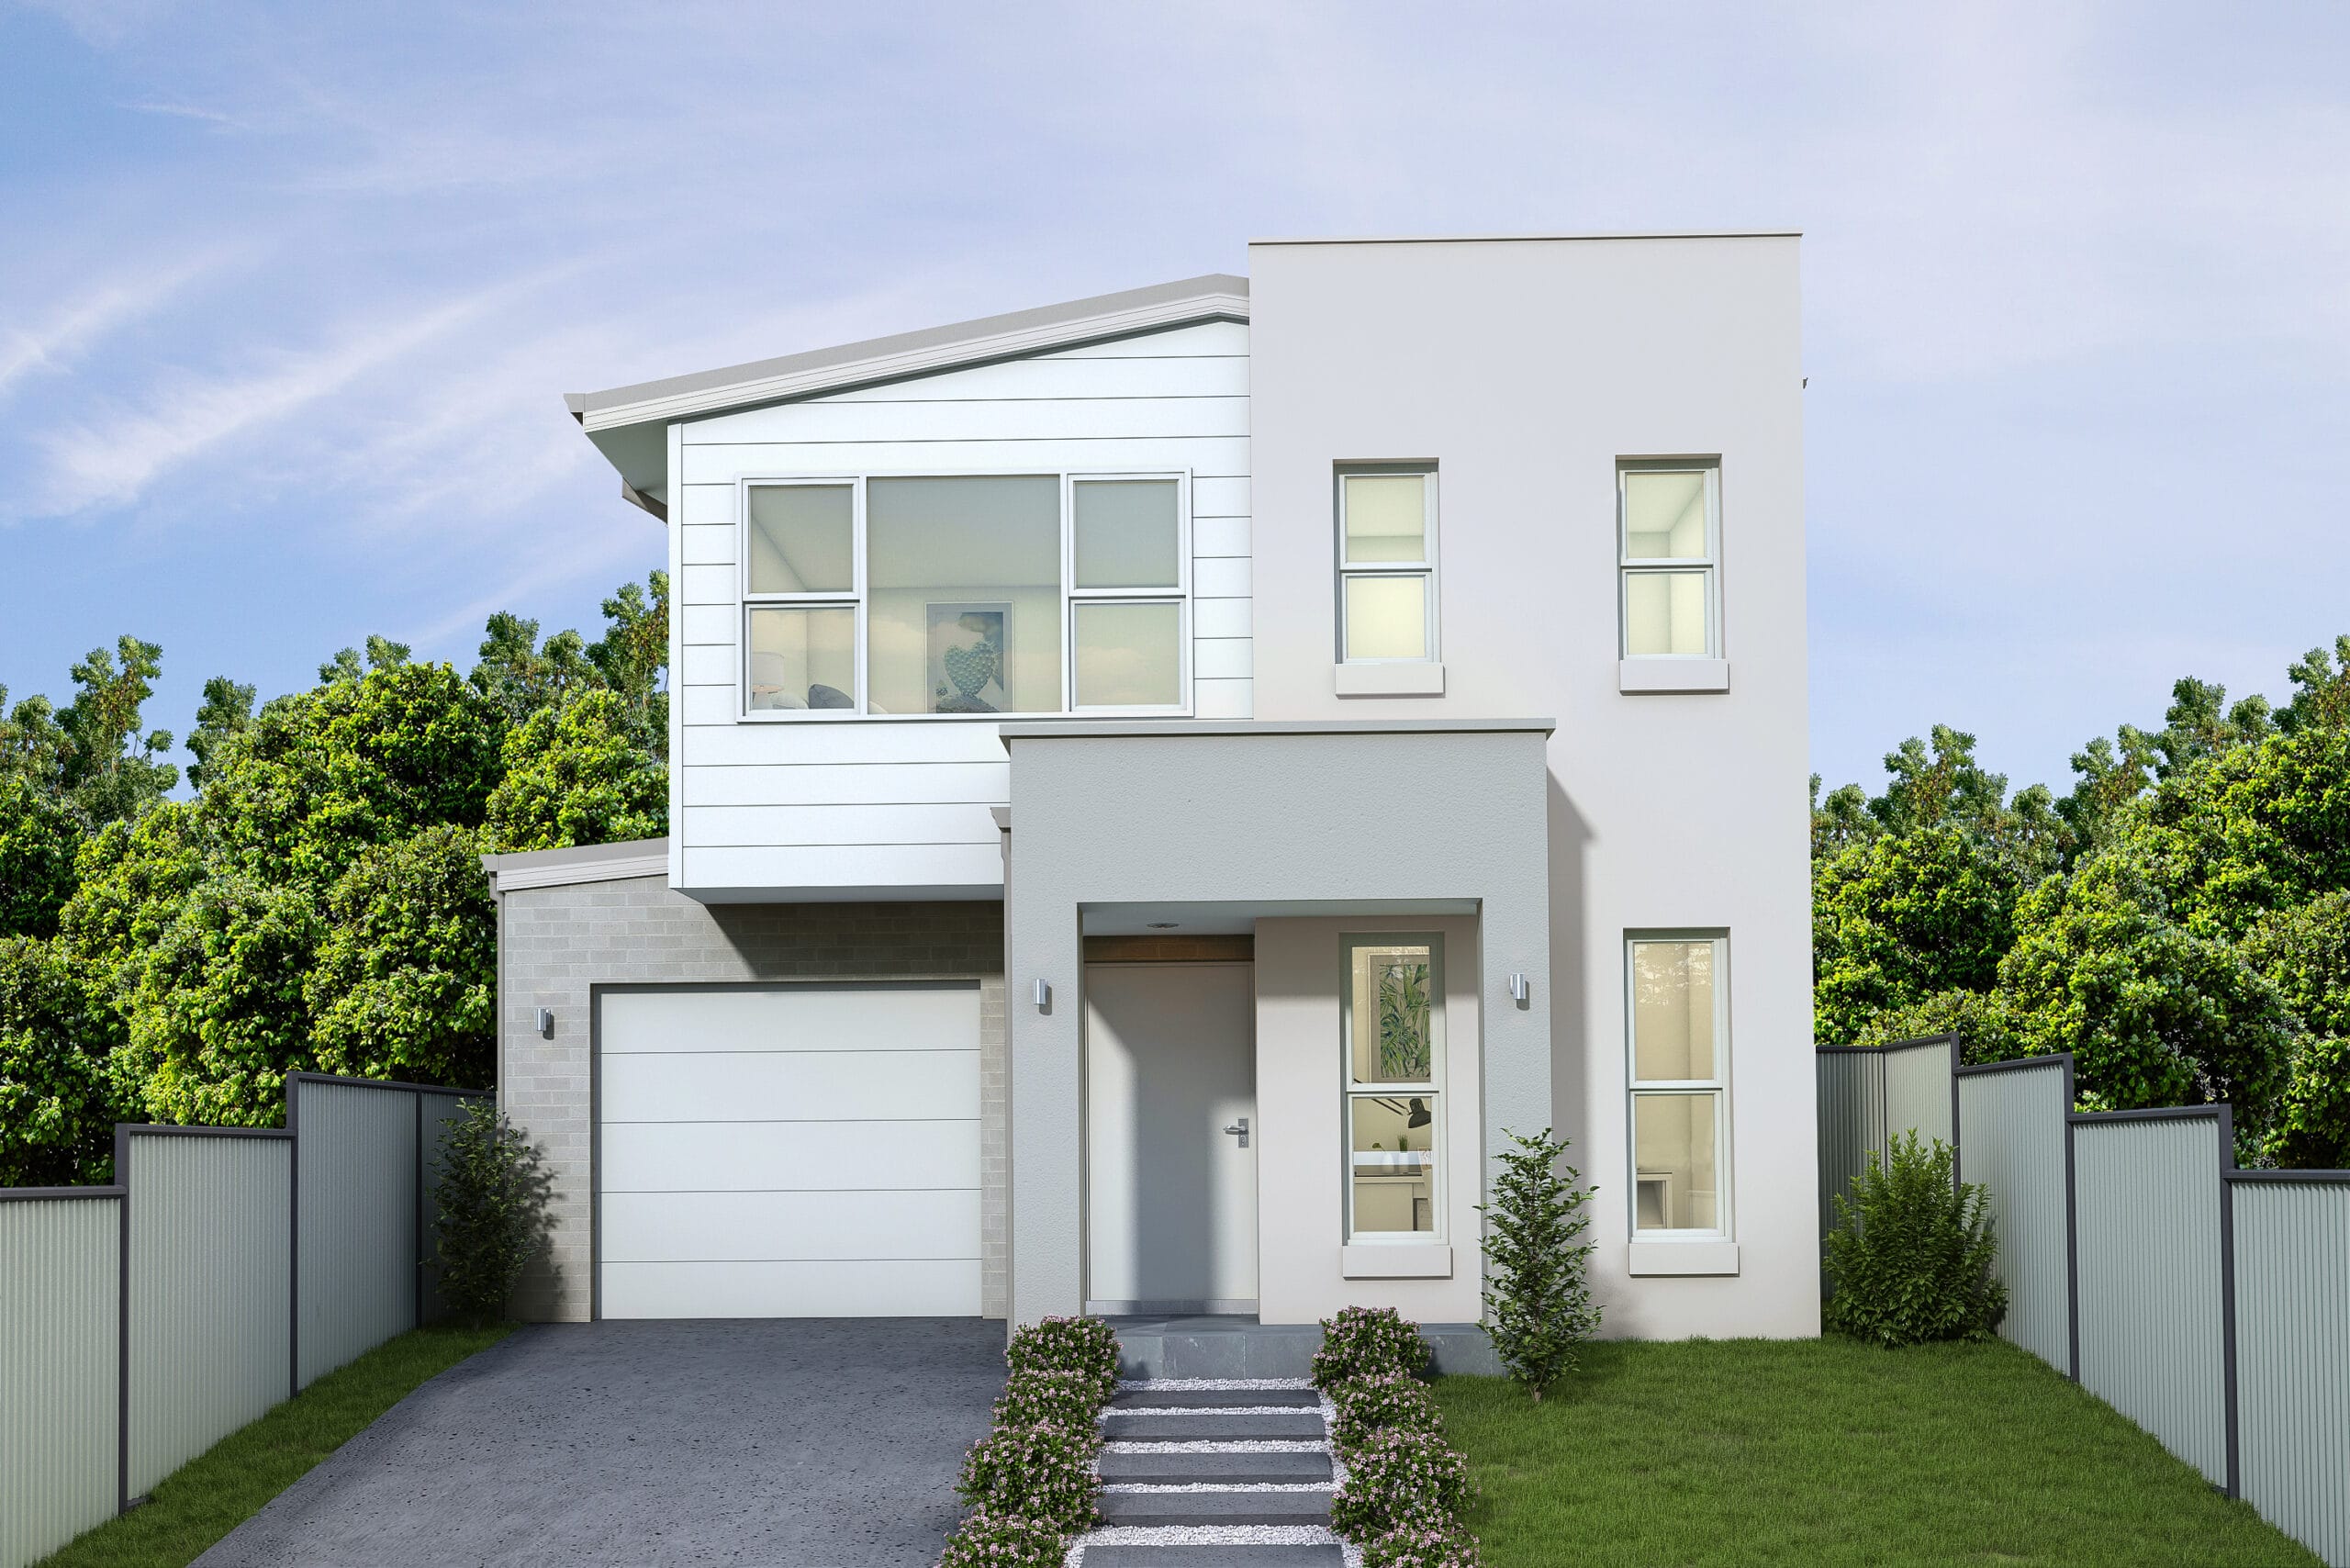 Render of a modern, two storey home located in Austral